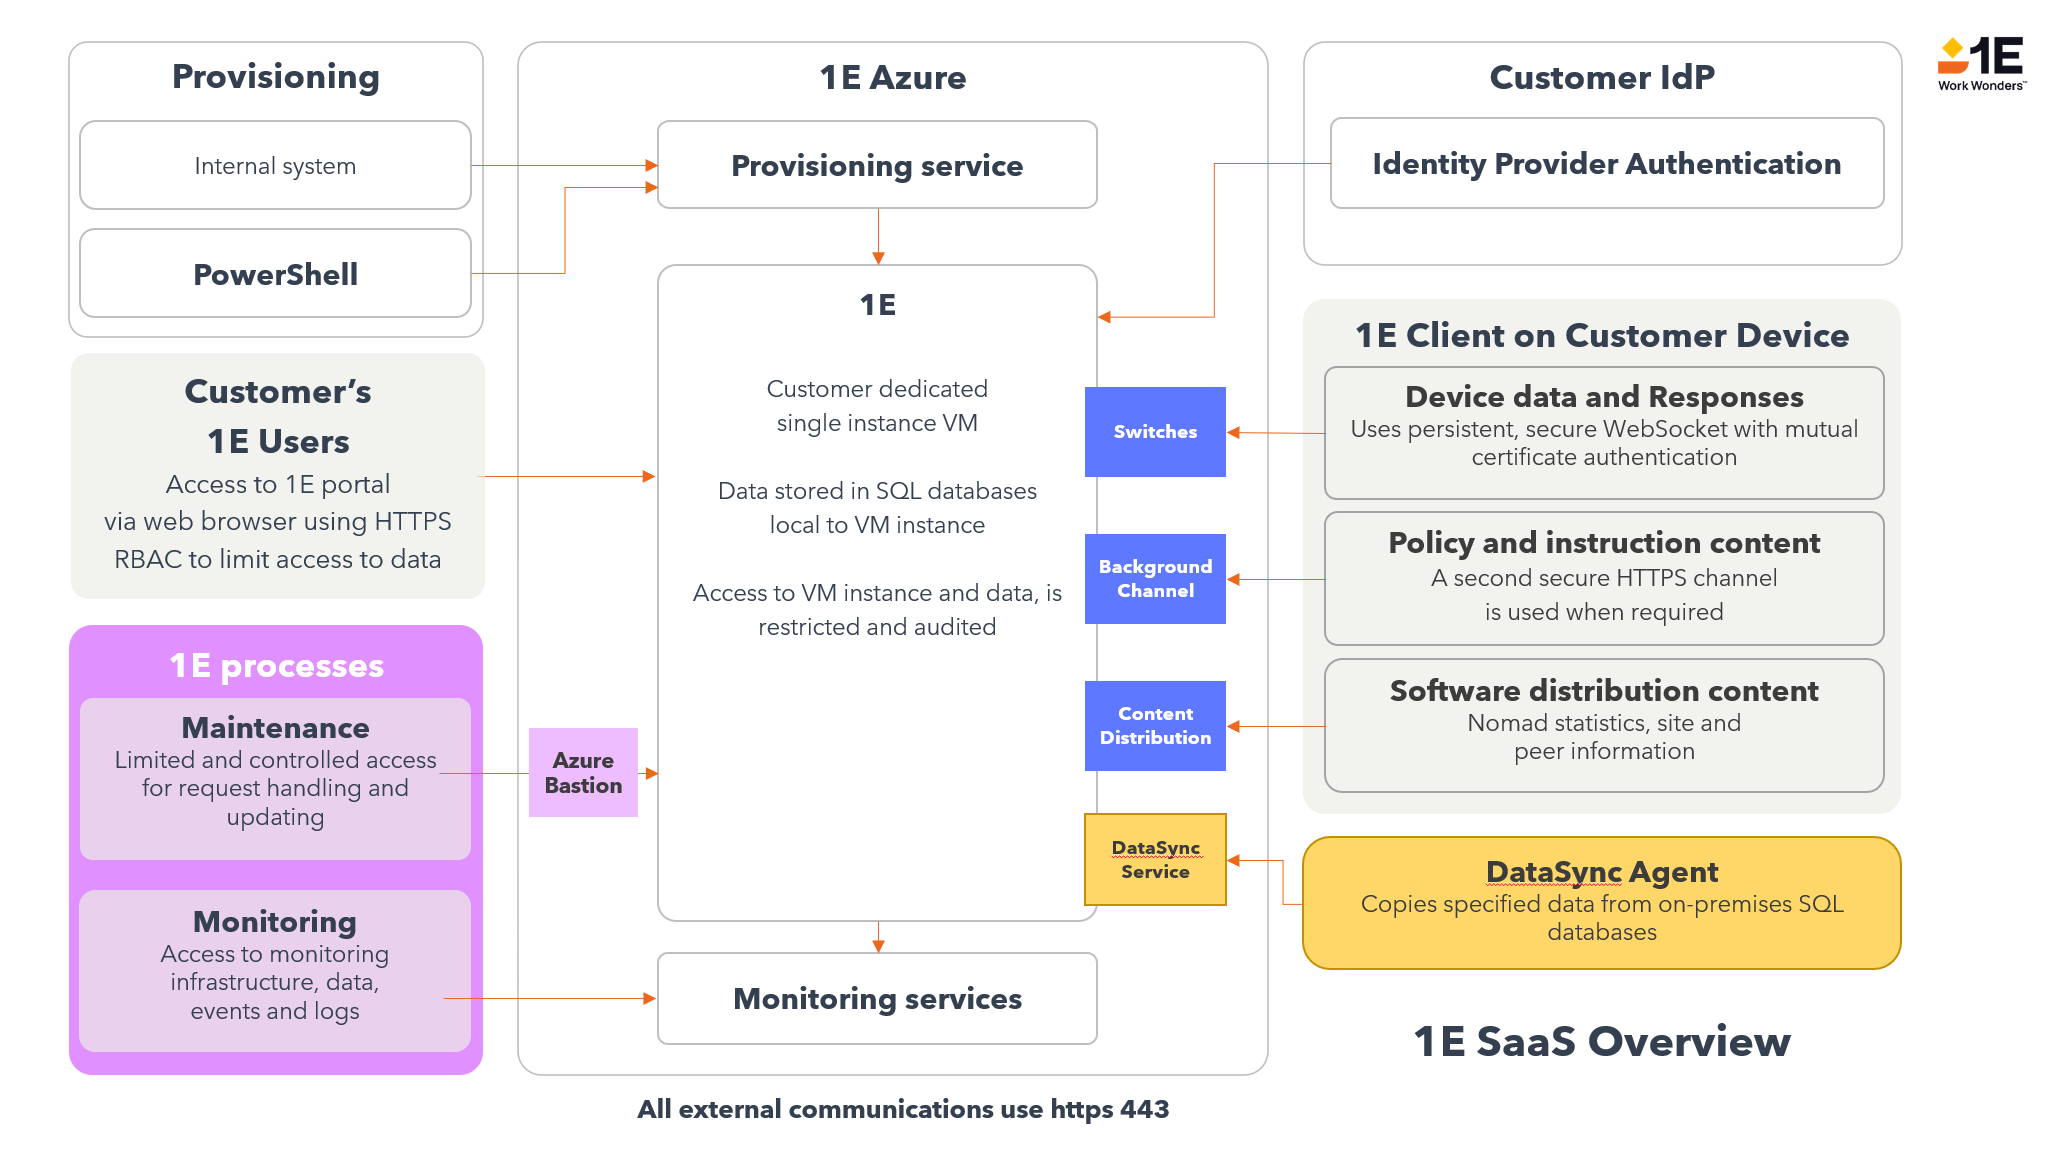 8_4_1E_SaaS_Overview.png